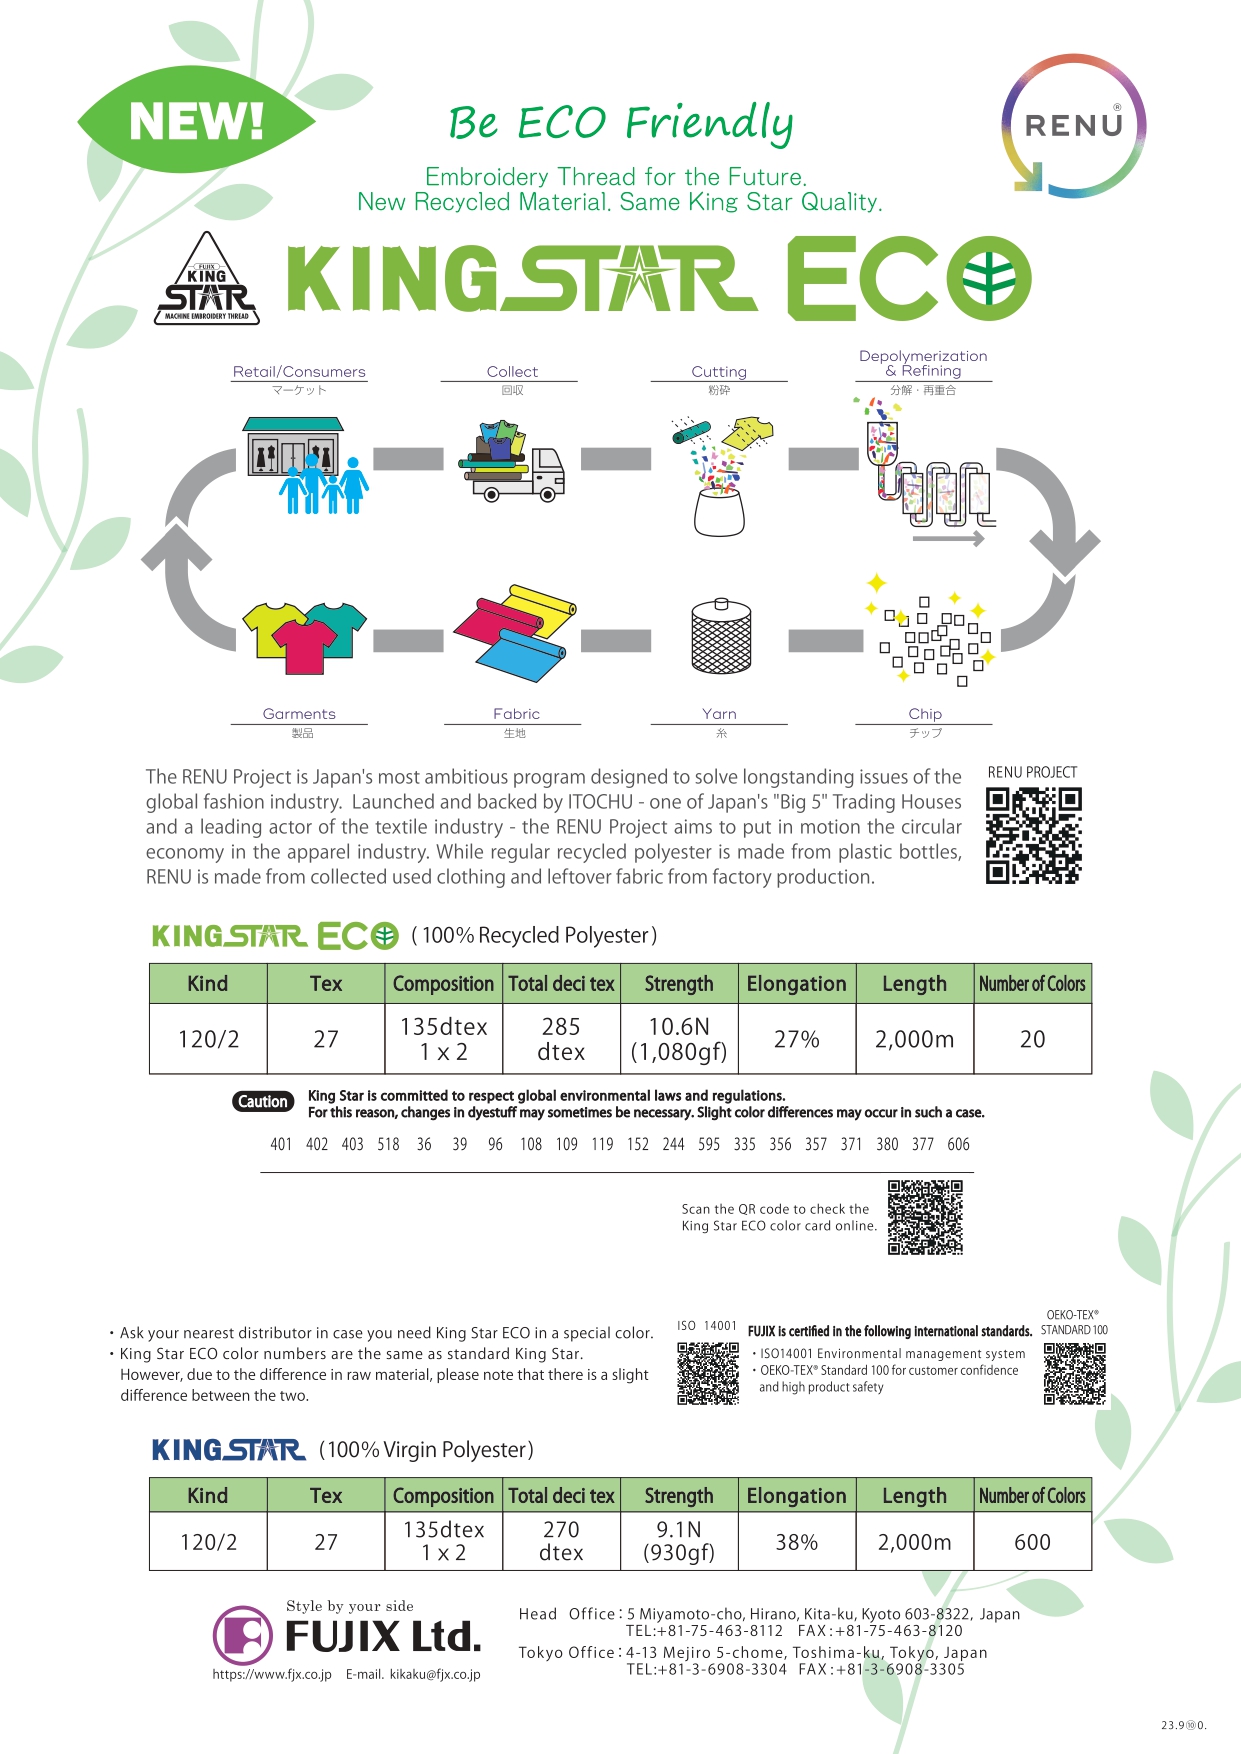 Fujix Ltd. has introduced ‘KING STAR ECO’, a sewing machine embroidery thread for use with RENU!